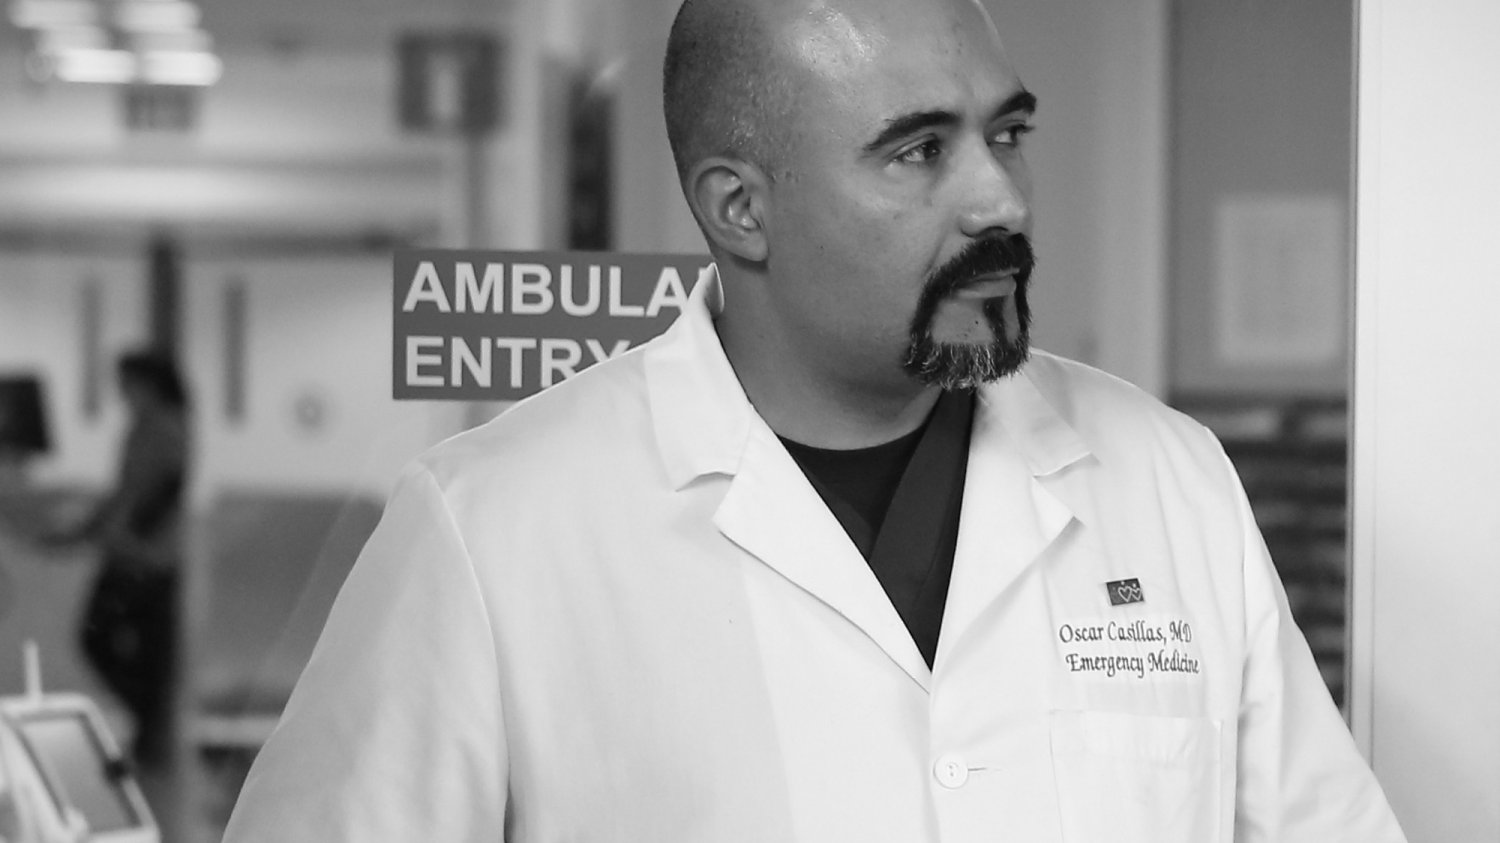 Black and white portrait of Dr. Oscar Casillas, a middle-aged Latino doctor